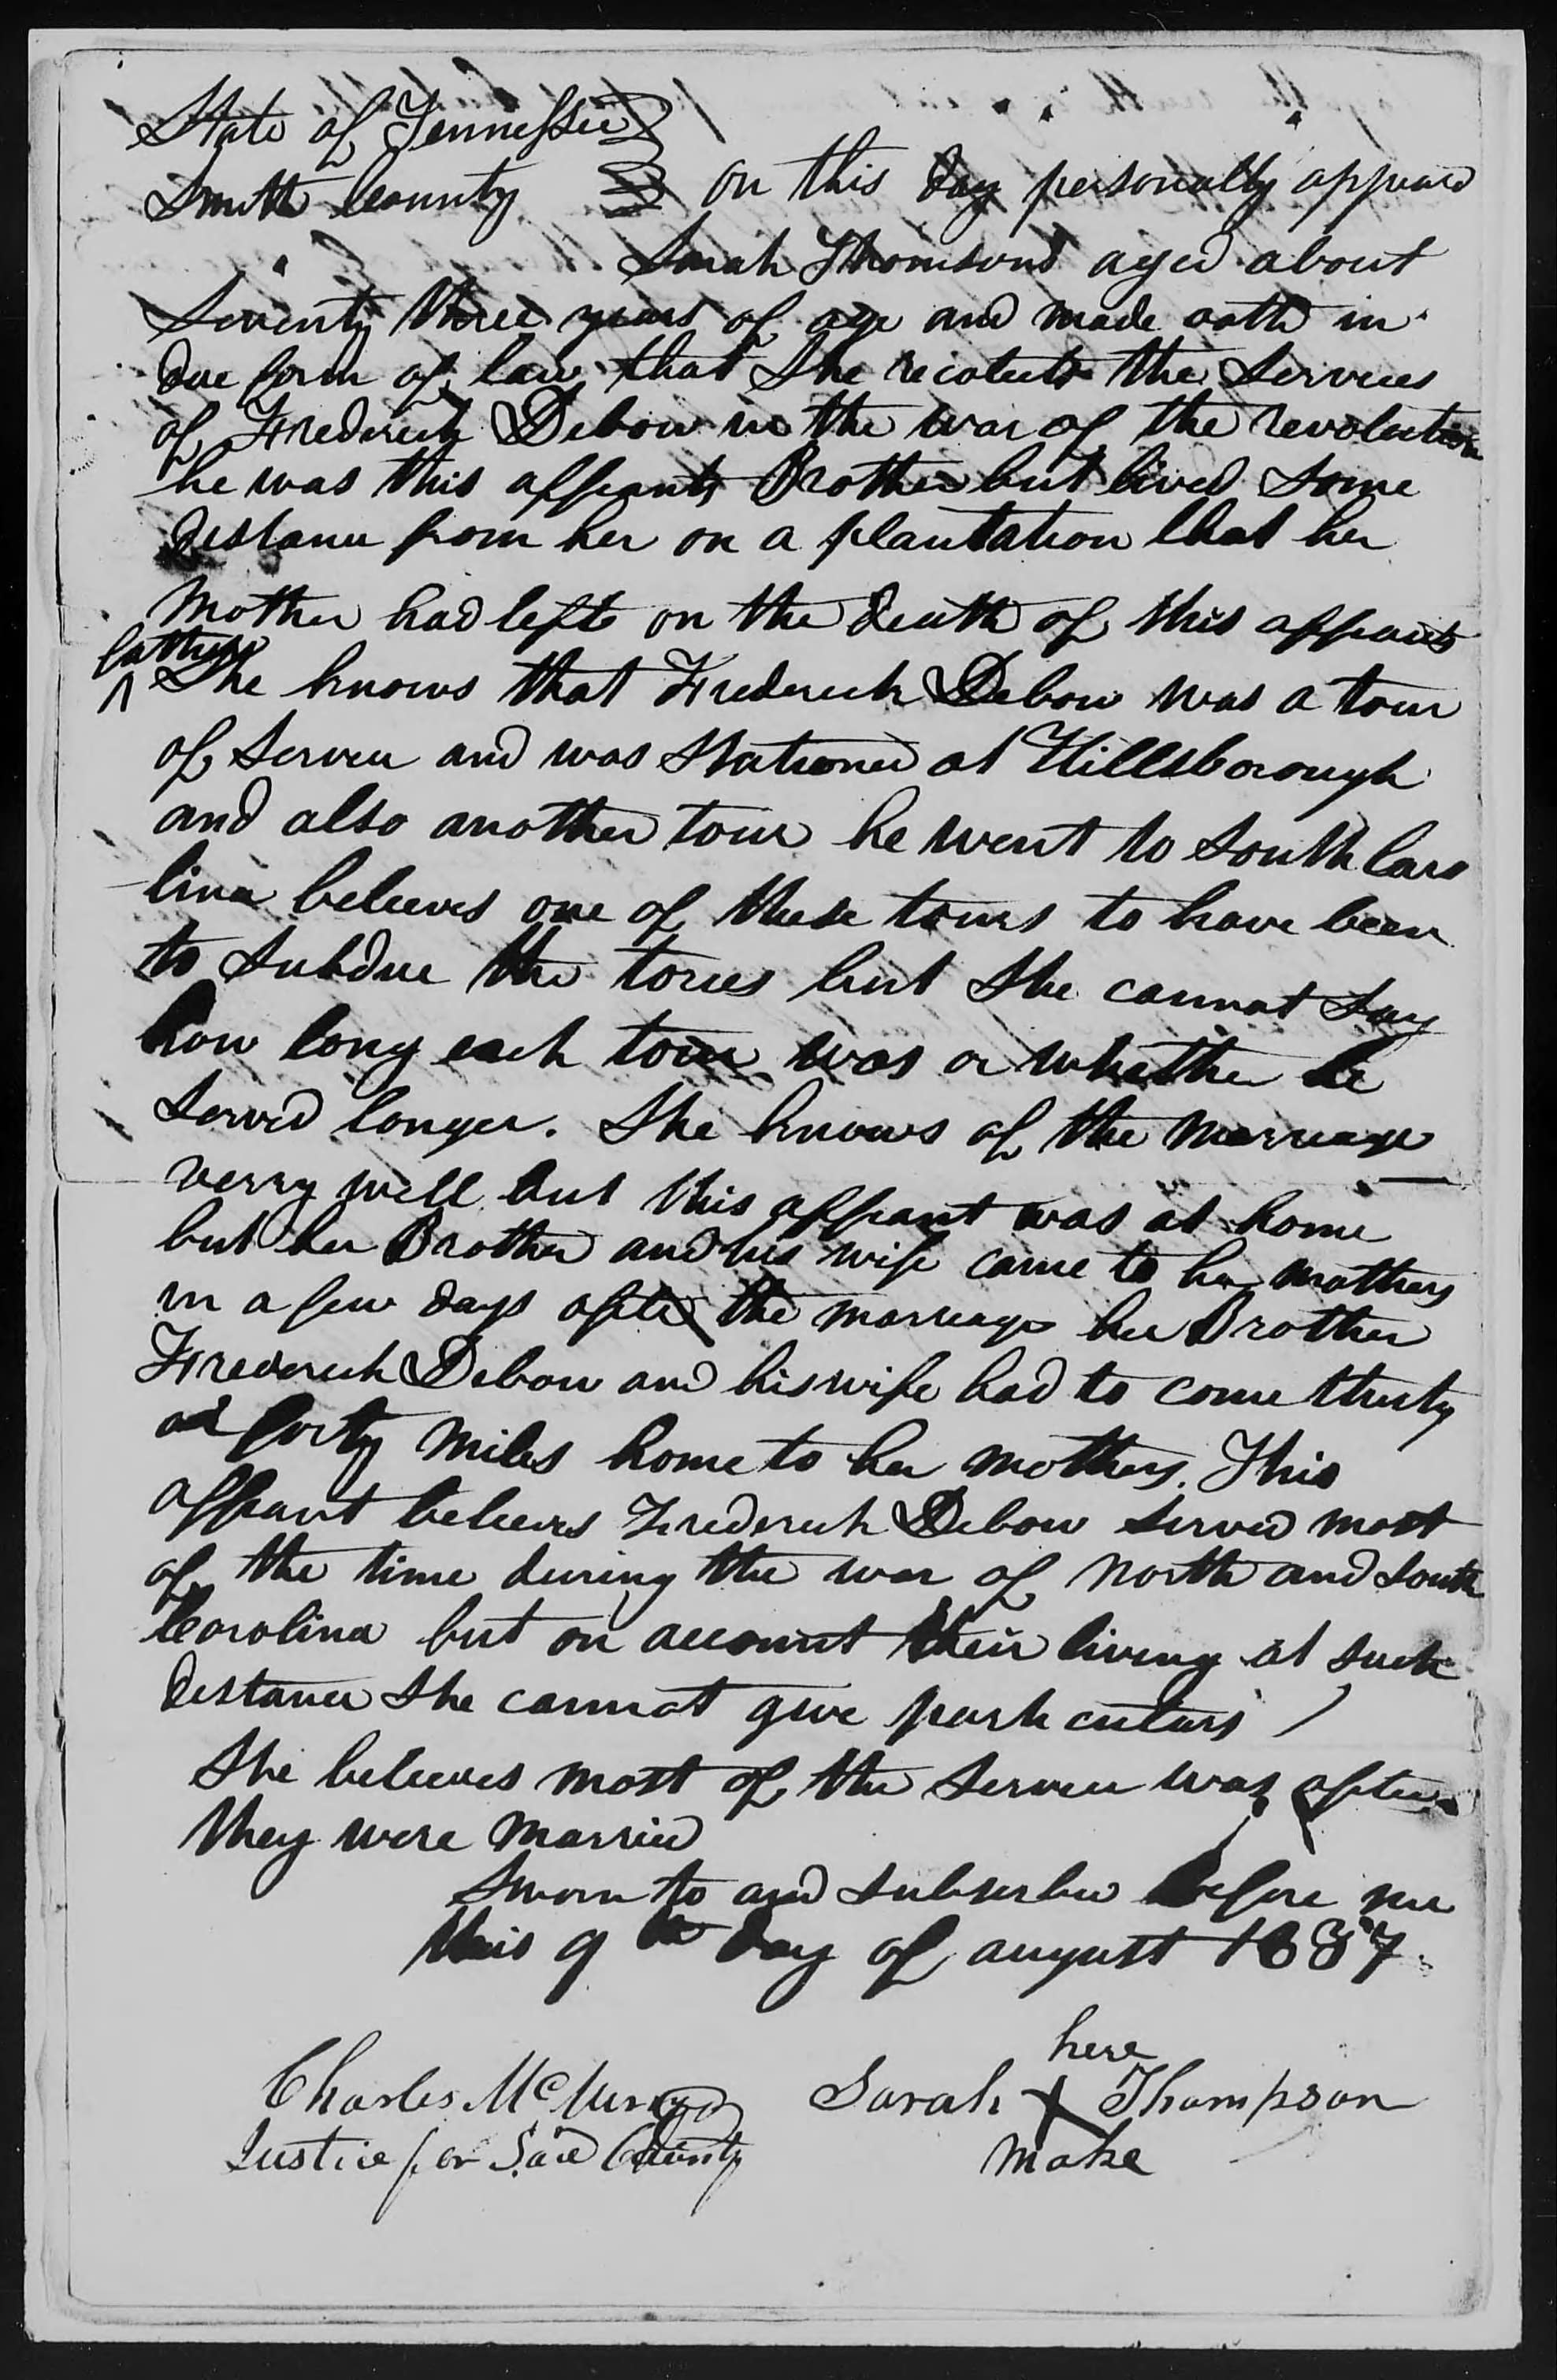 Affidavit of Sarah Thompson in support of a Pension Claim for Rachel Debow, 9 August 1837